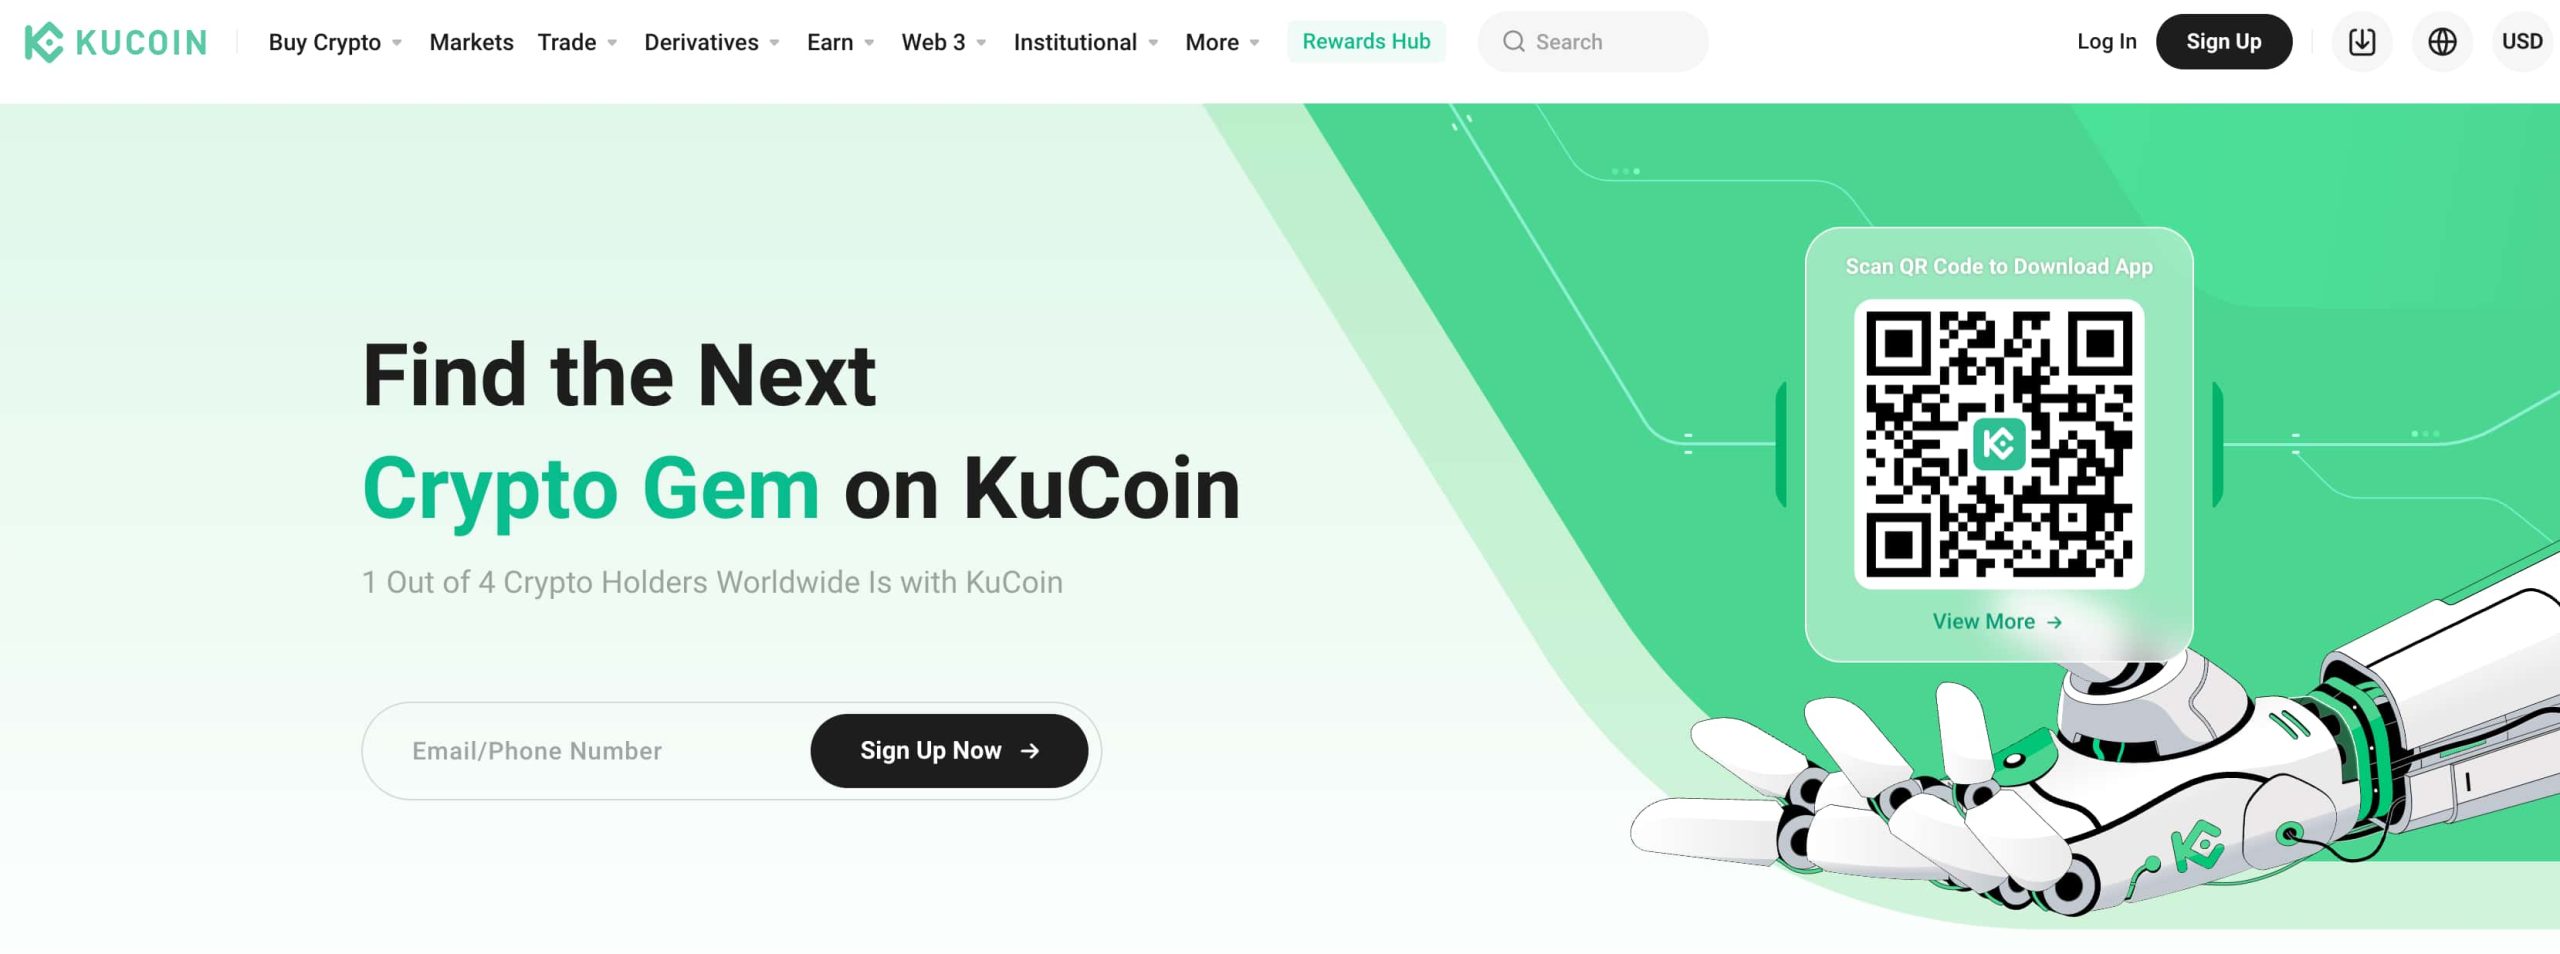 Kucoin landing page with QR code